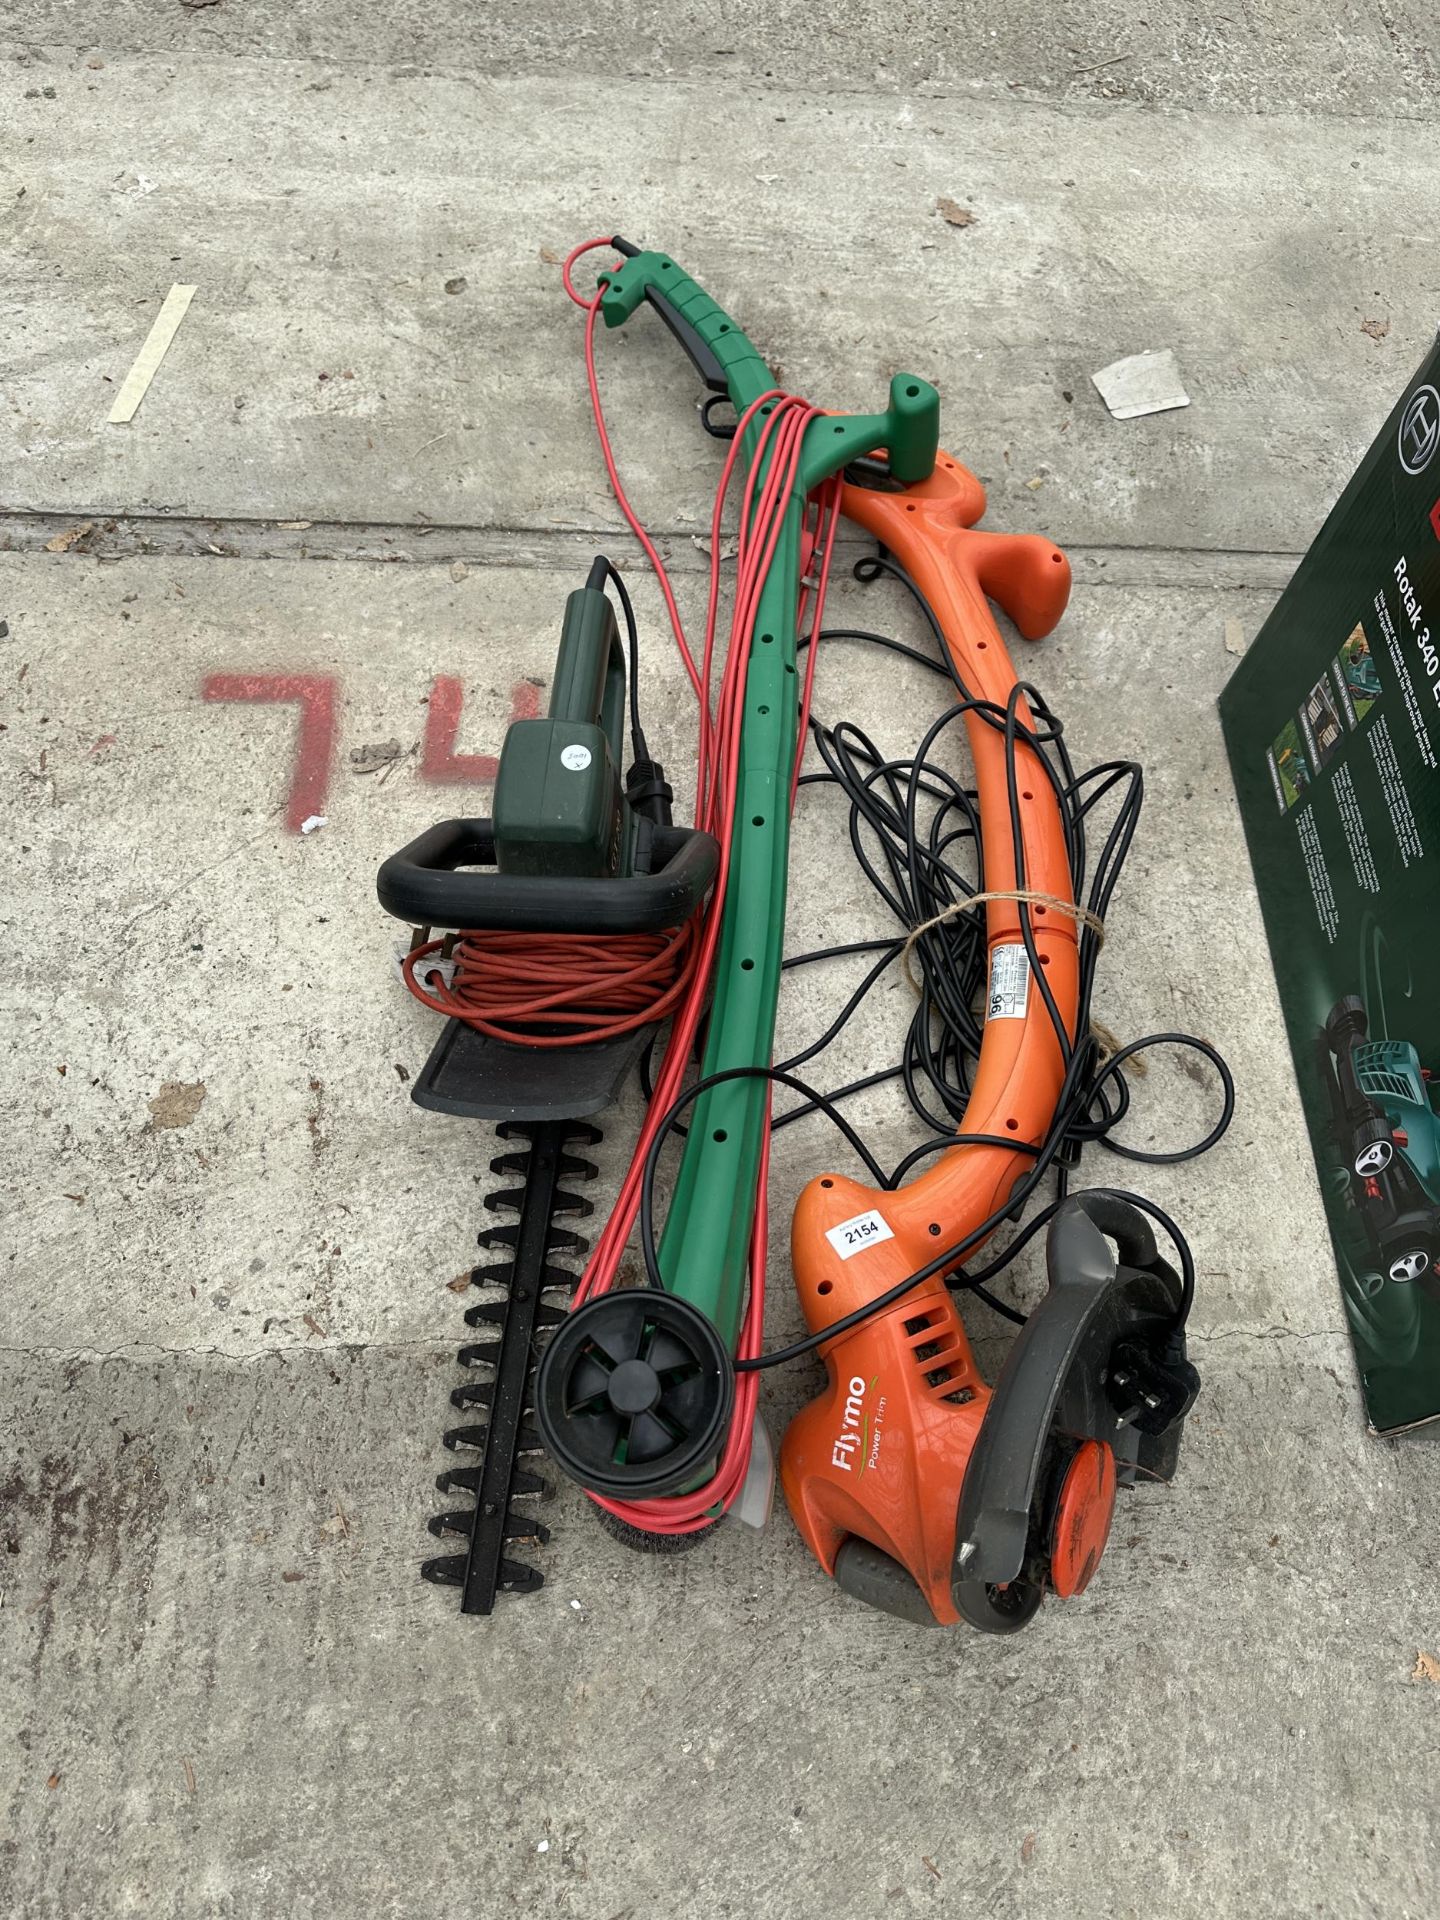 AN ELECTRIC STRIMMER, LAWN EDGER AND HEDGE TRIMMER